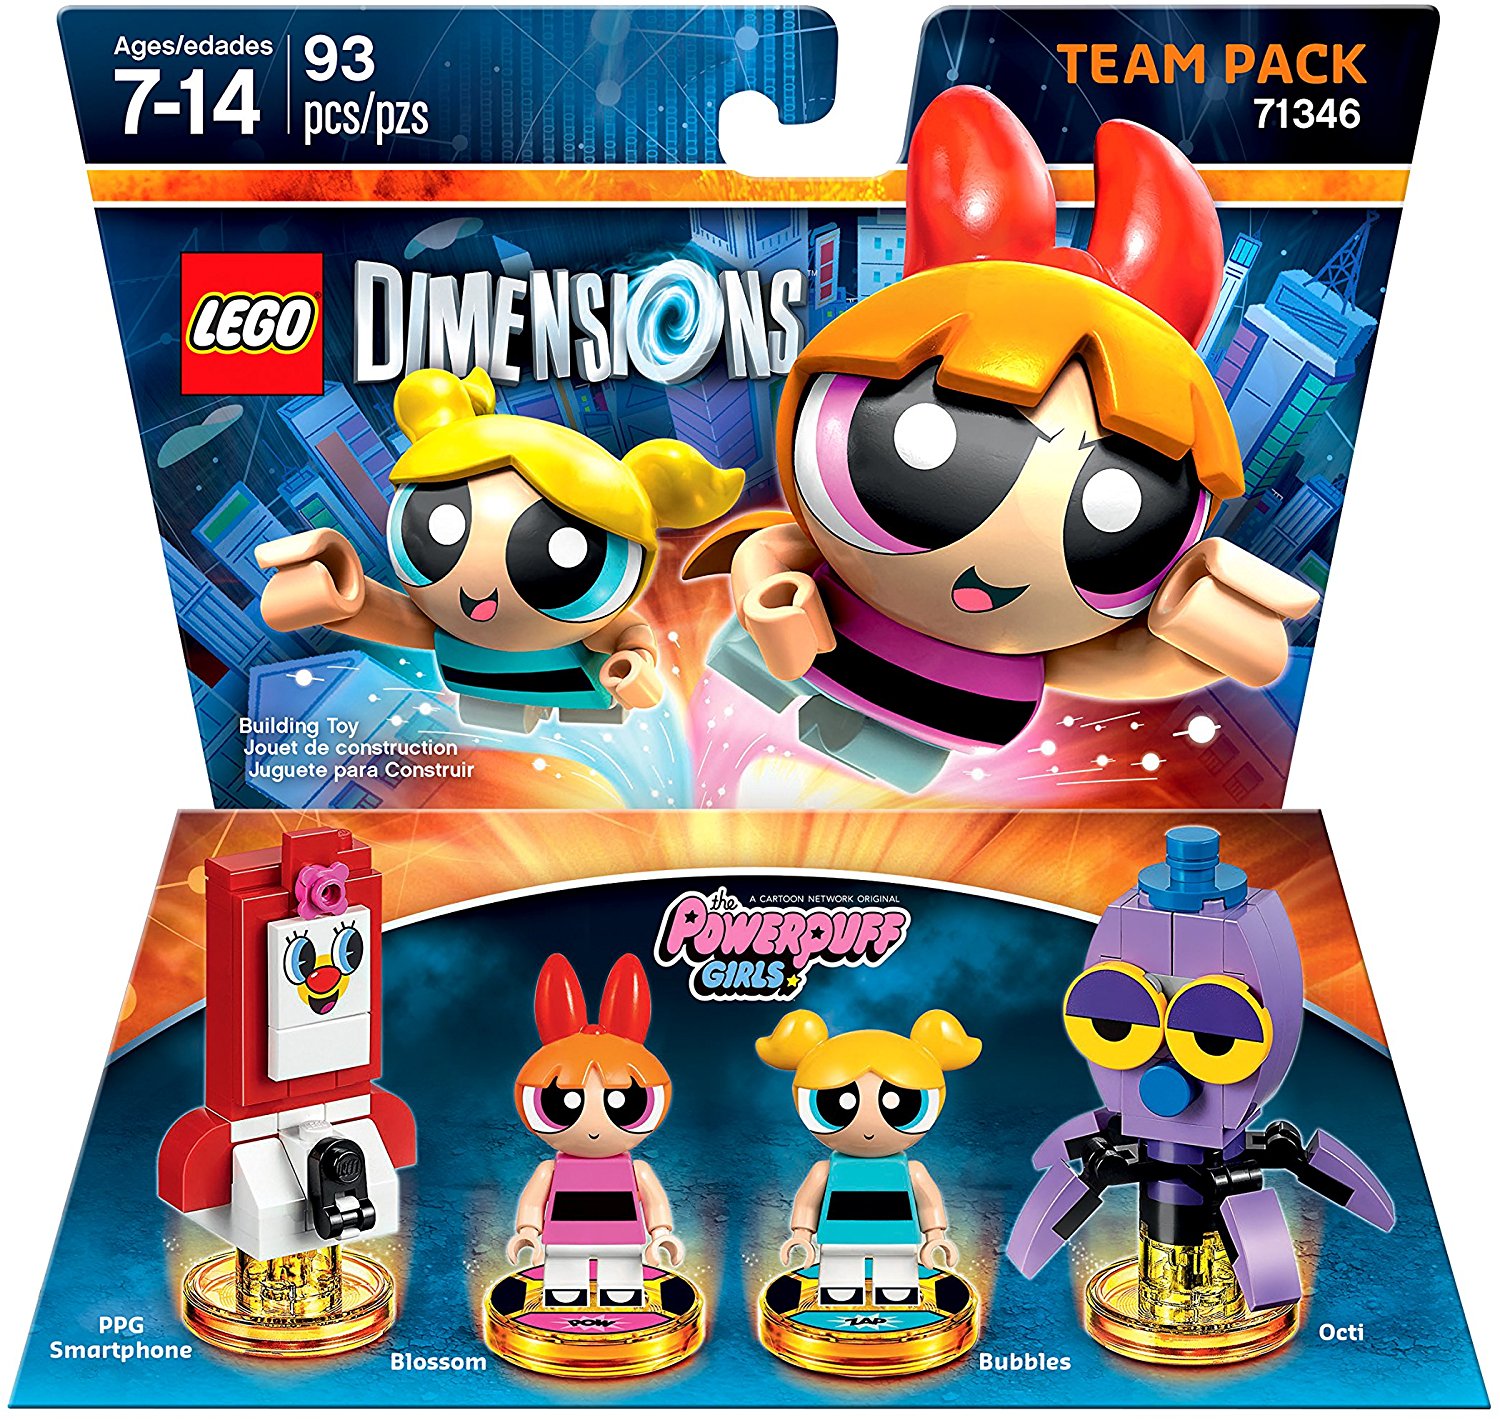 Ved skille sig ud hæk LEGO Powerpuff Girls Rumored for 2018 - The Brick Fan